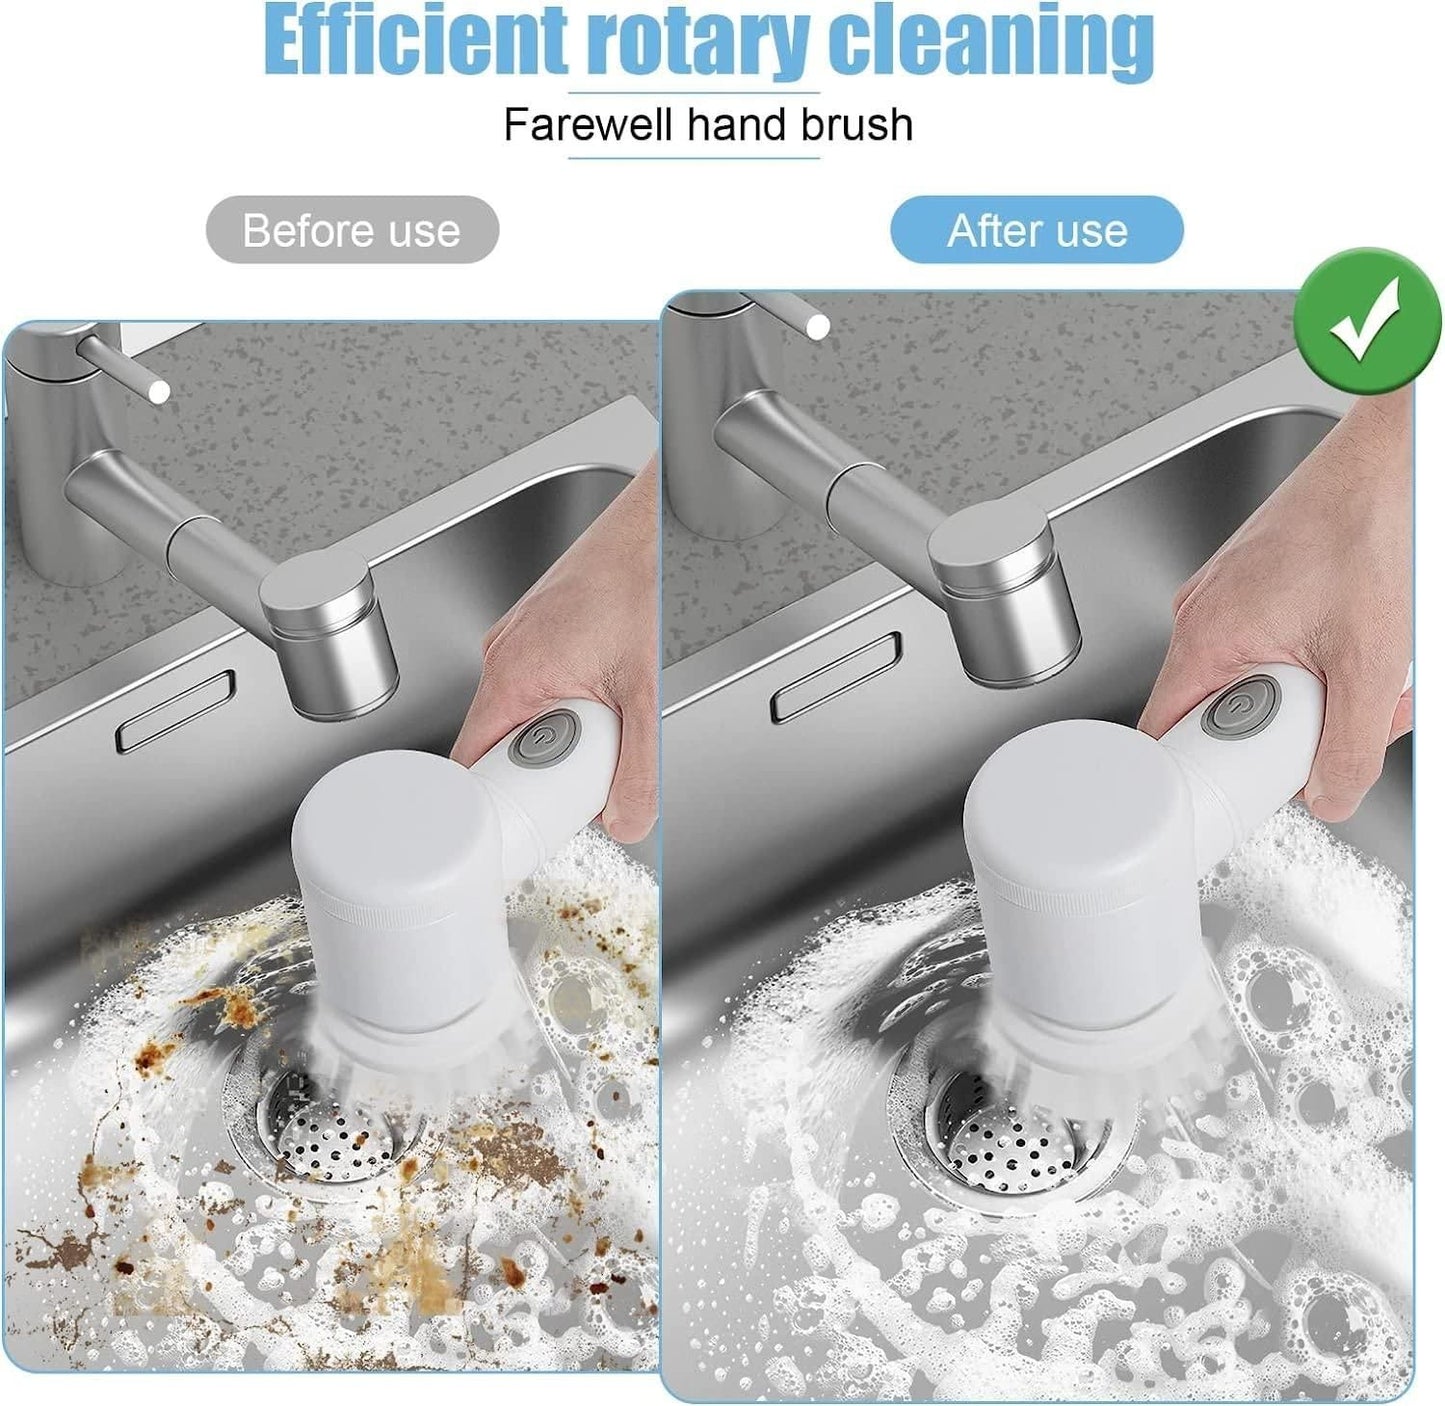 This image has 2 images - One shows a dirty sink before using the brush and the other shows a squeaky clean sink after usning the brush. This shows an efficient rotary cleaning.